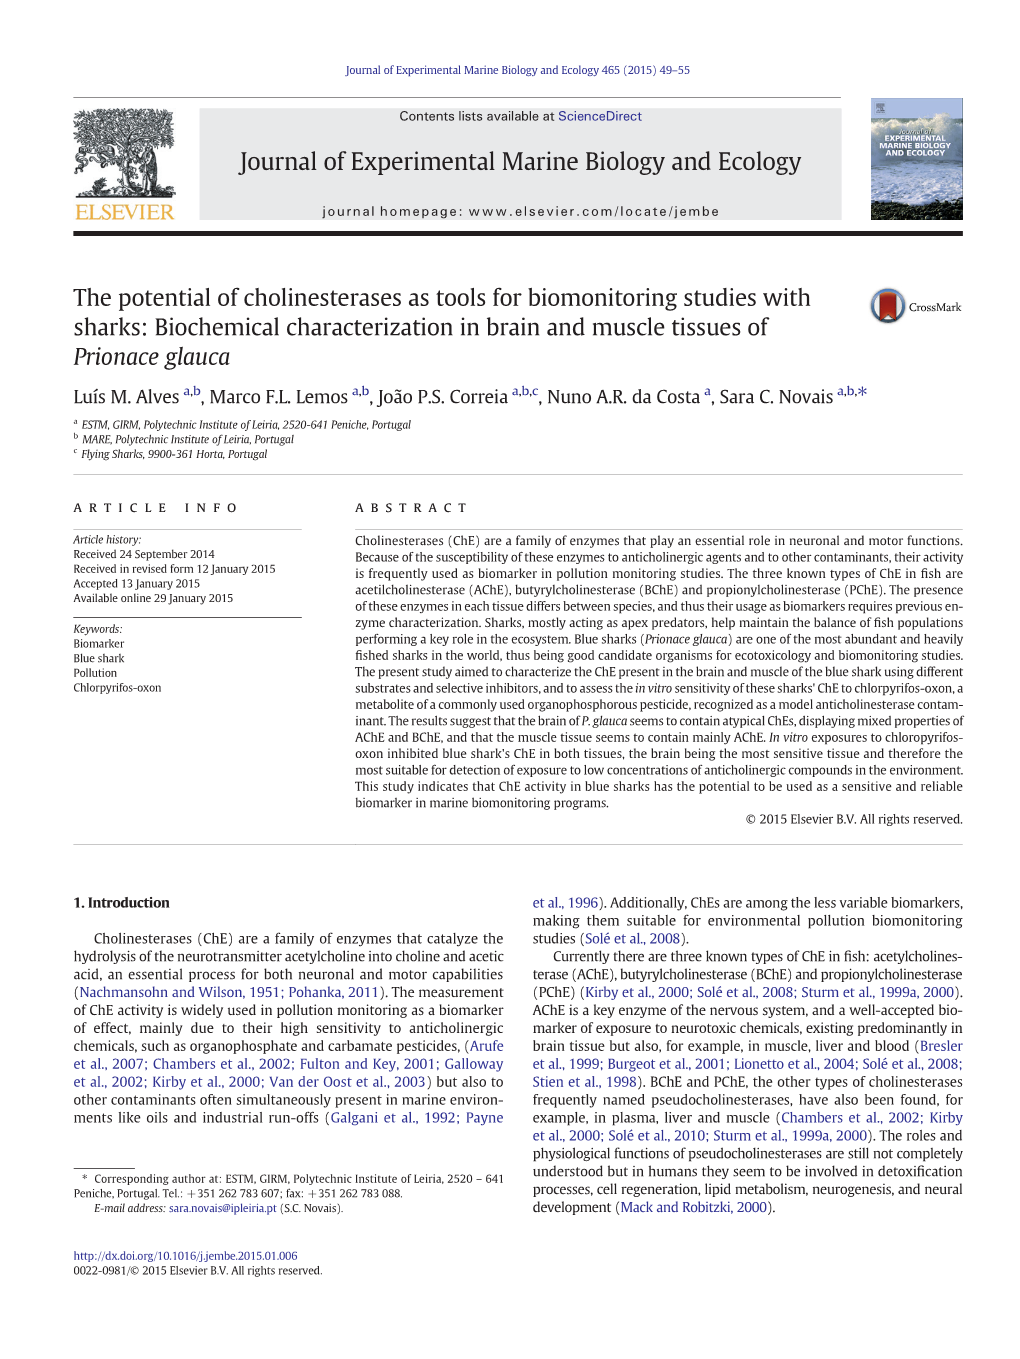 The Potential of Cholinesterases As Tools for Biomonitoring Studies with Sharks: Biochemical Characterization in Brain and Muscle Tissues of Prionace Glauca